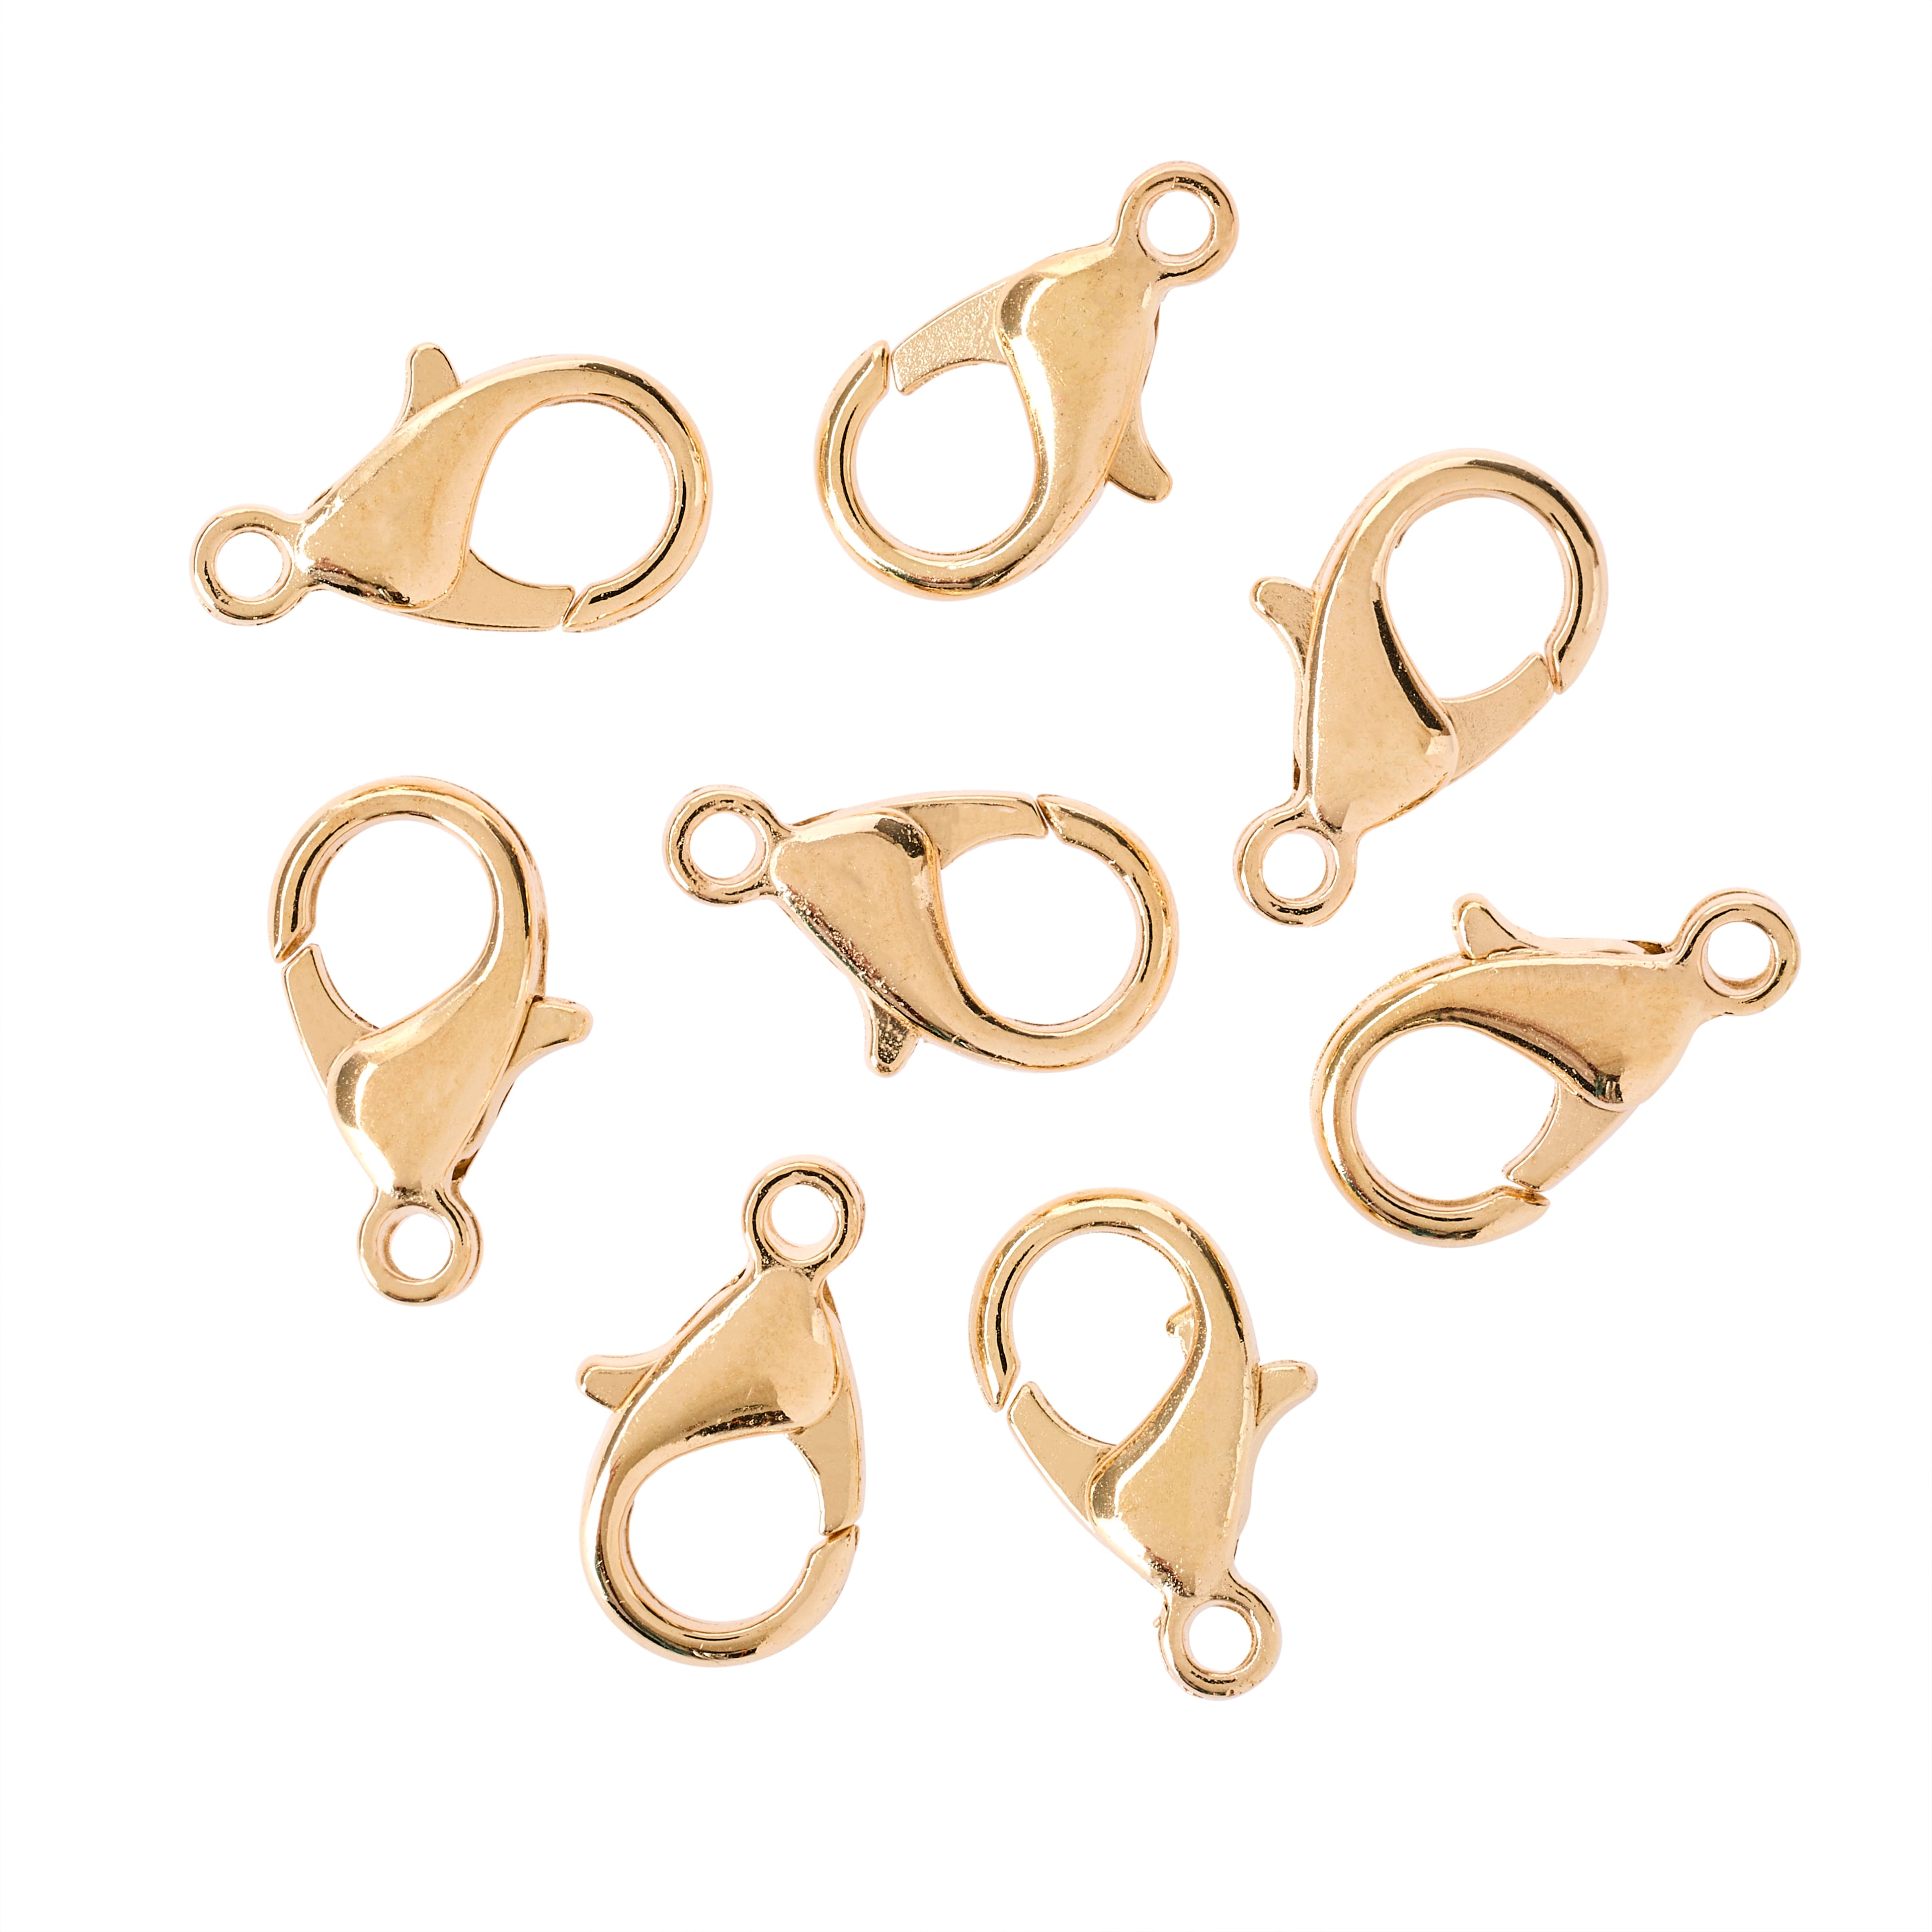 3 GOLD 15mm HANDBAG HOOKS FOR LUGGAGE TAG LOBSTER CLASP suits